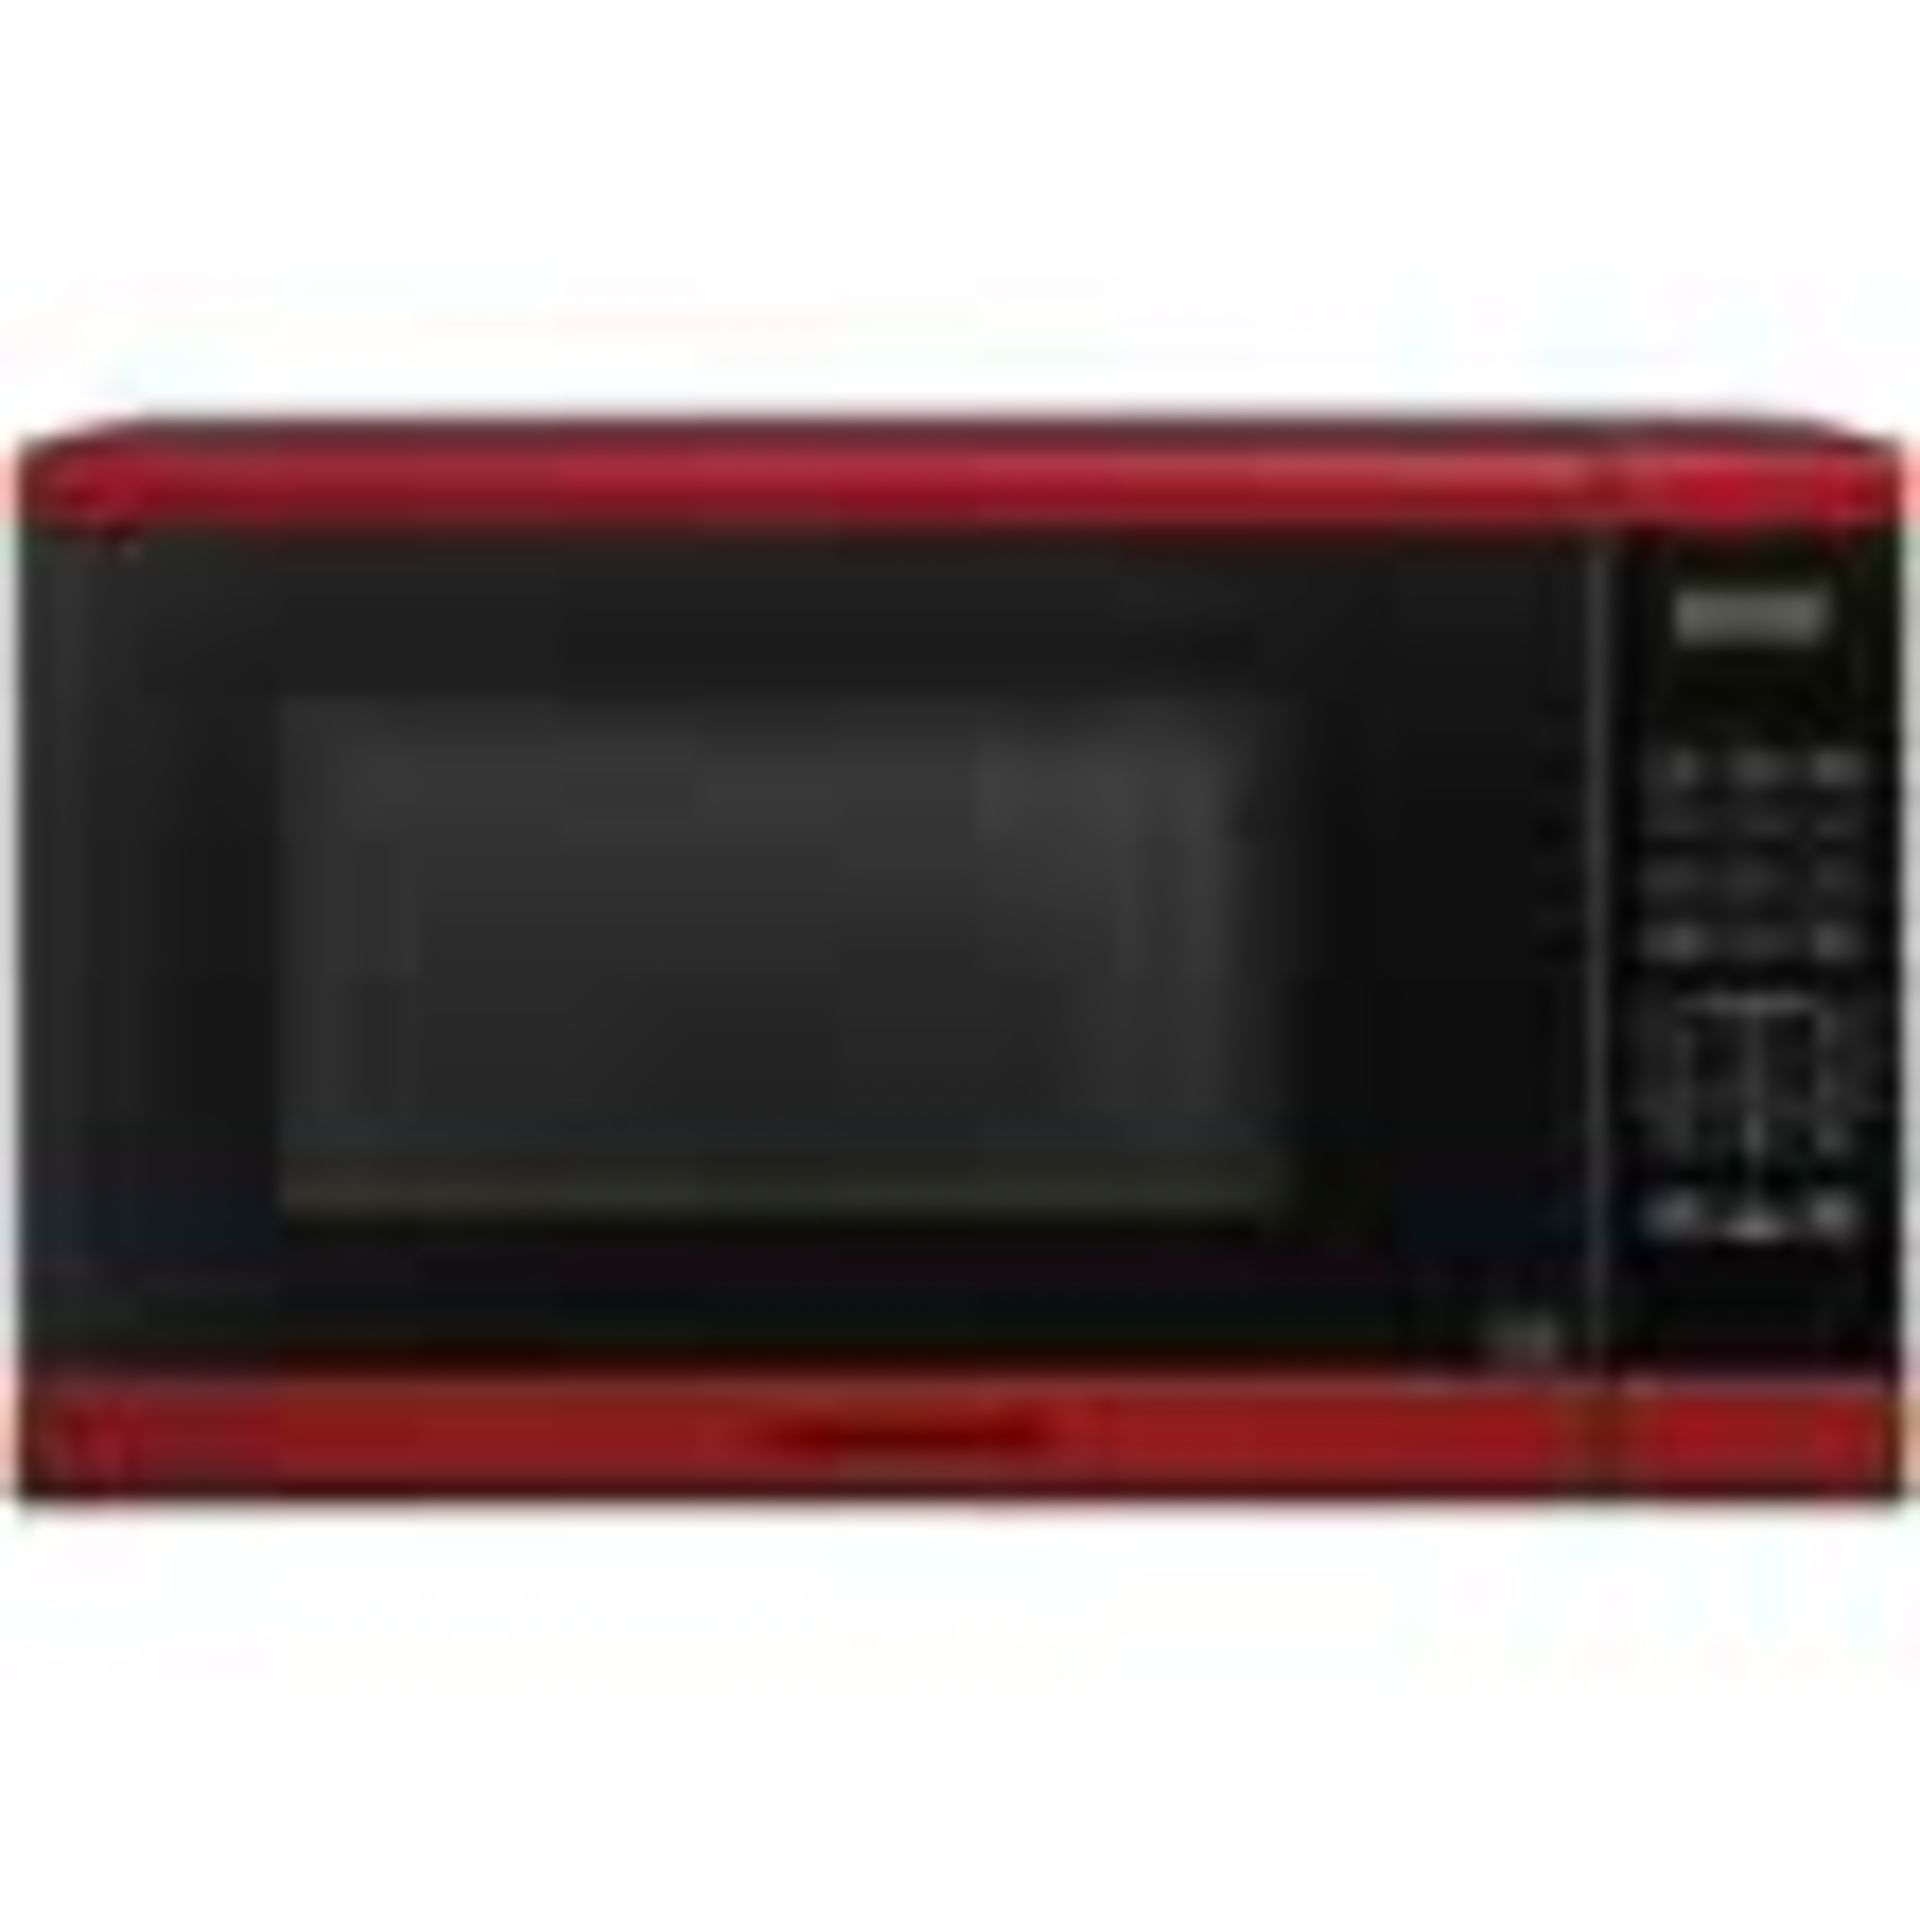 MORPHY RICHARDS 20L 800W SOLO TCH RED (ITEM IS RAW CUSTOMER RETURN)